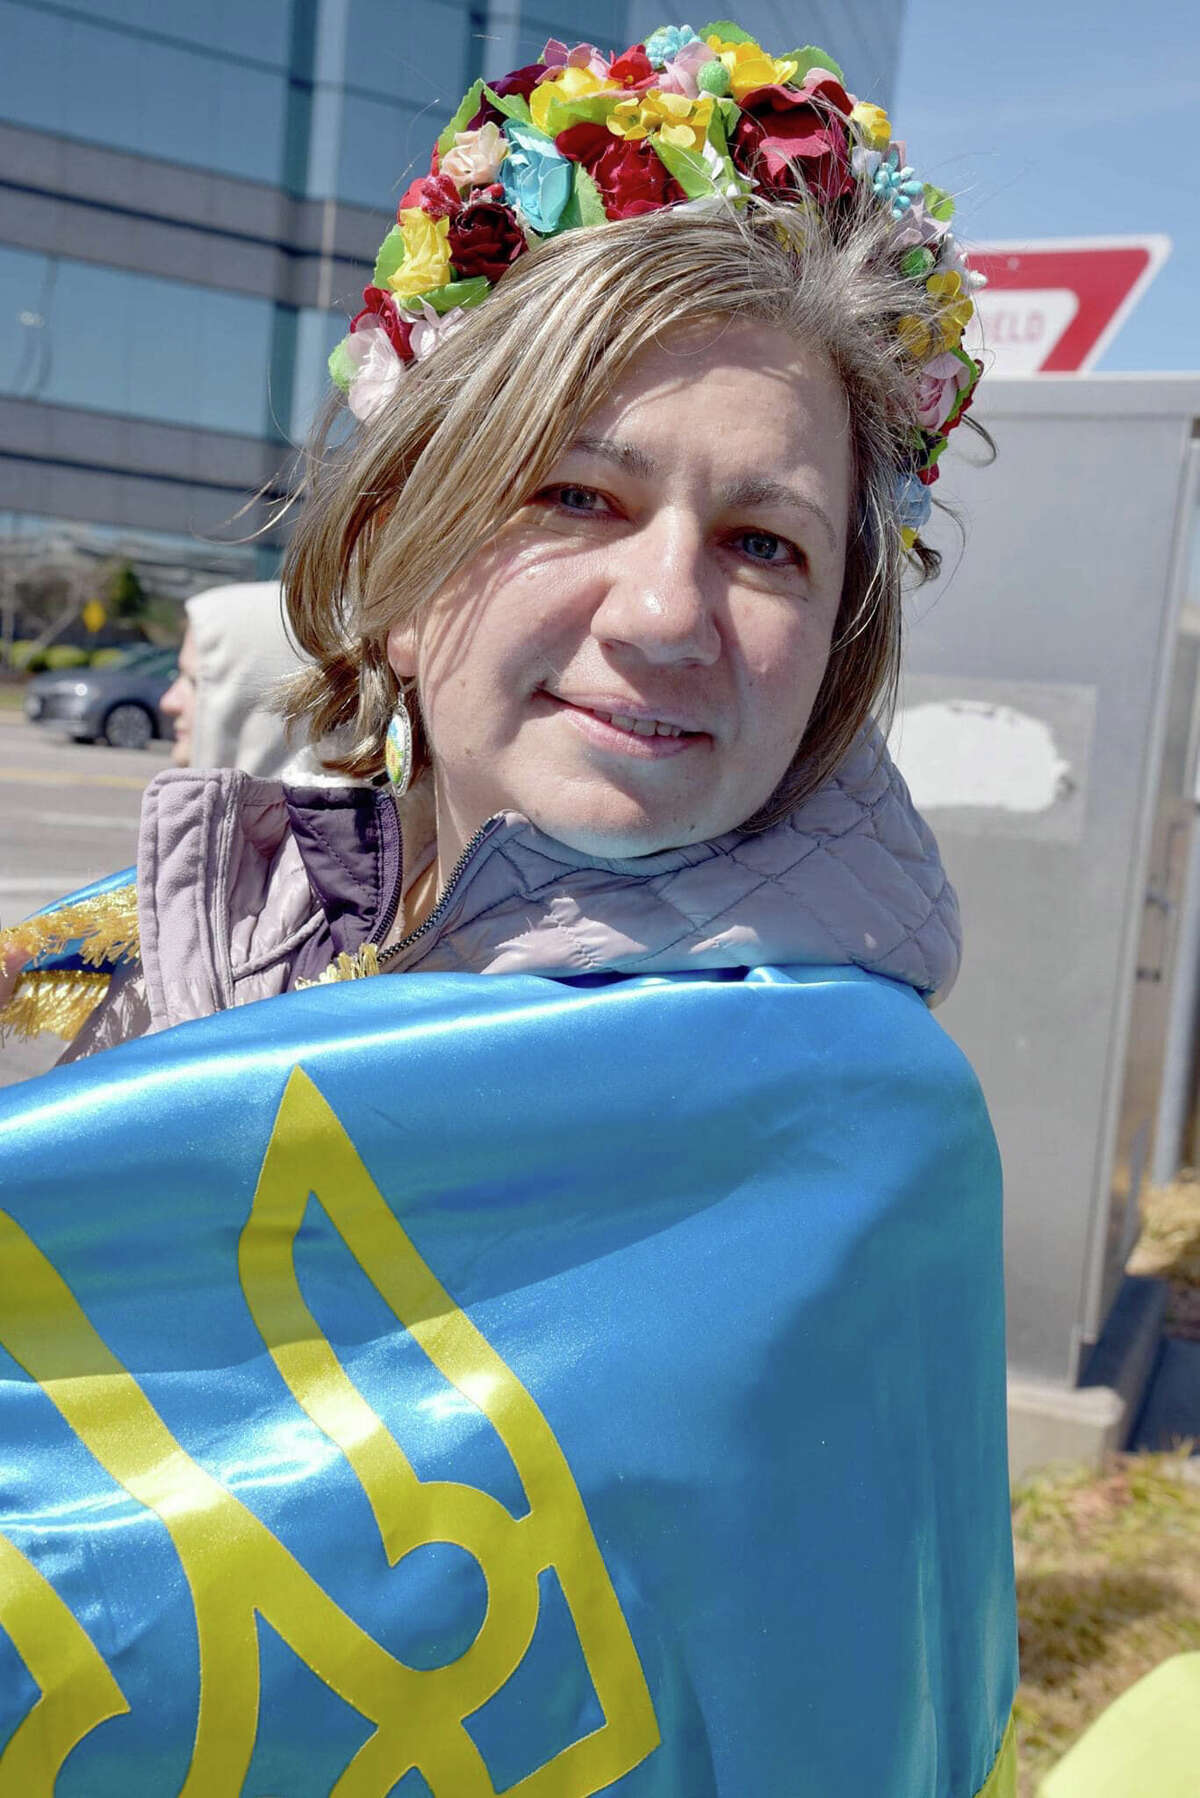 Tetiana Safronova of Ballwin, Missouri, is draped in the Ukrainian flag. She and her husband, Yuri Safronov, emigrated from Ukraine and now are working to provide the people of their native land with humanitarian aid.